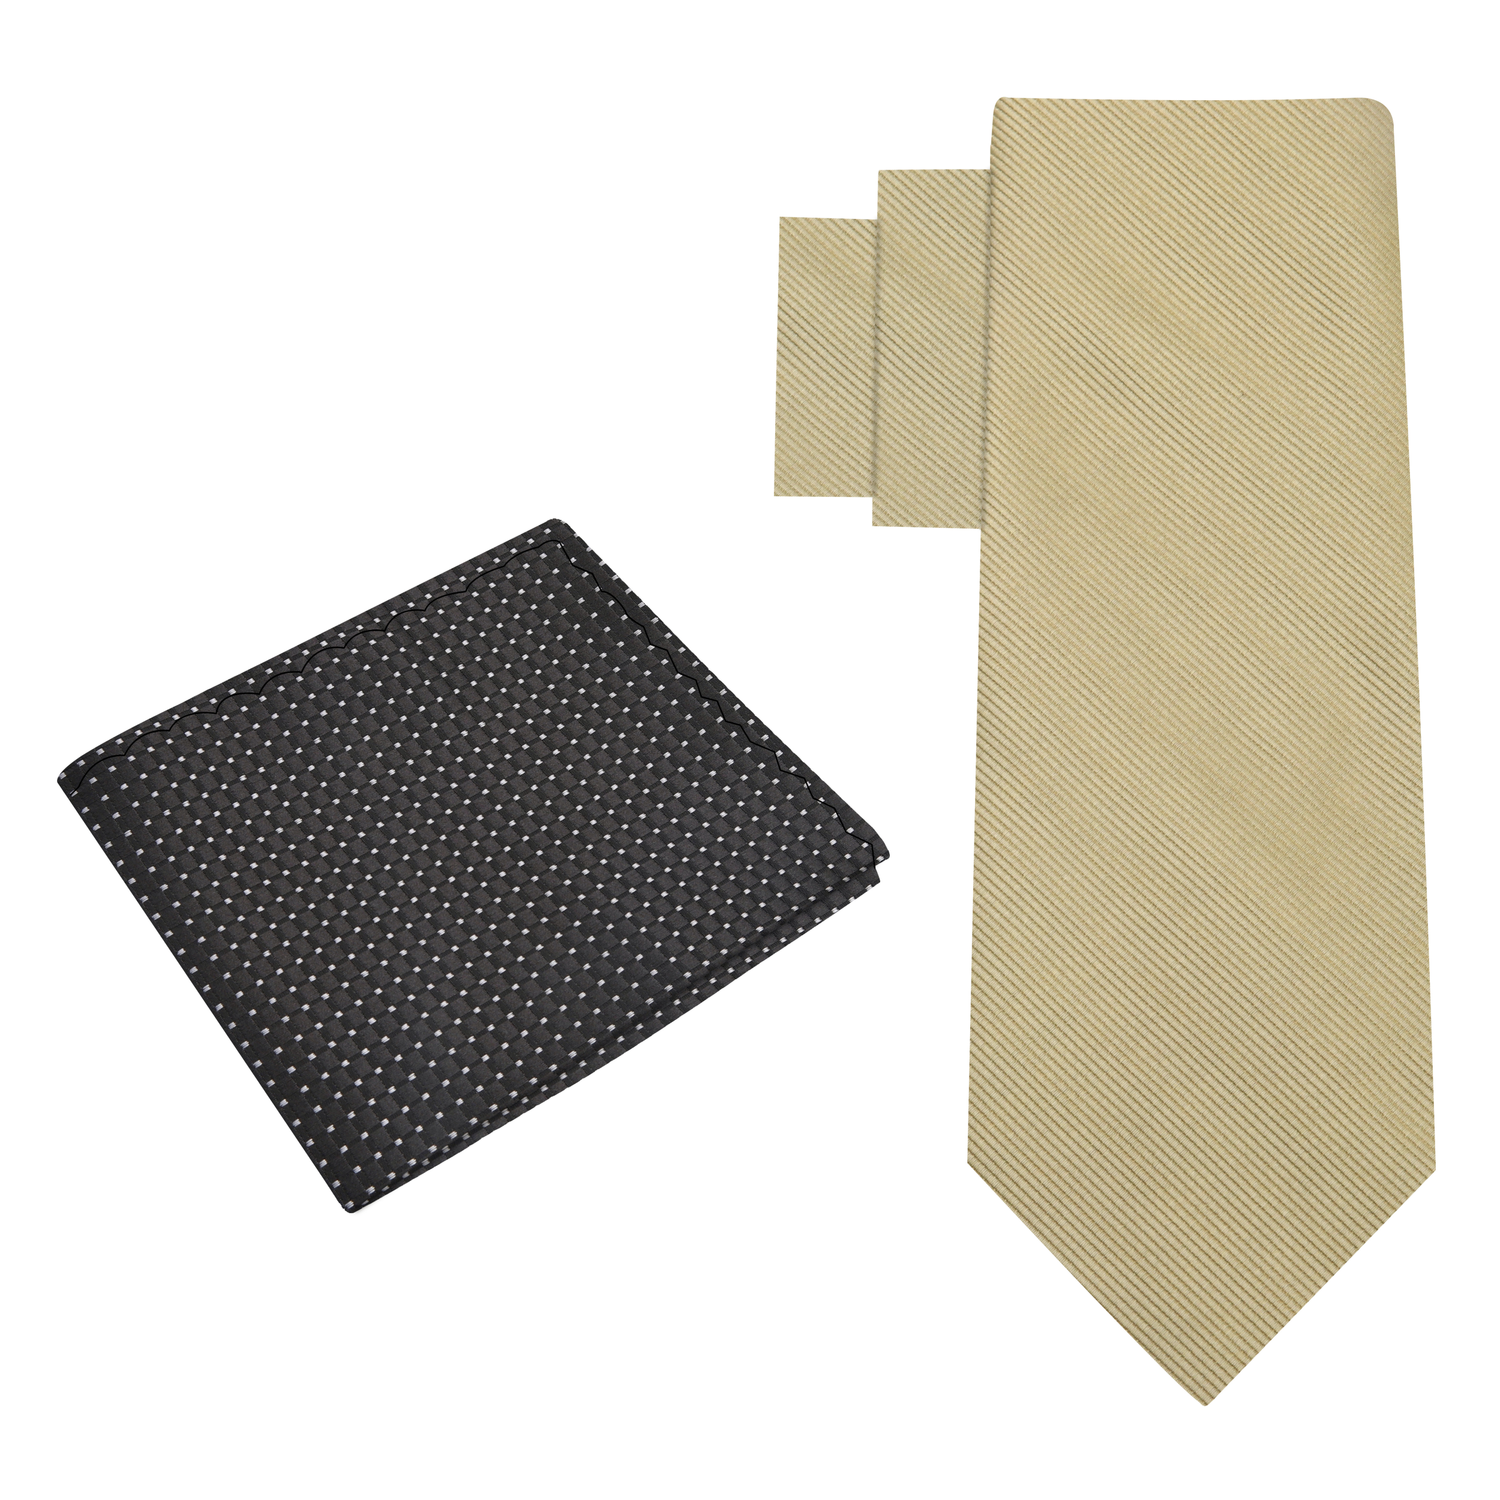 Alt View: Solid Pale Gold Tie and Black Geometric Square